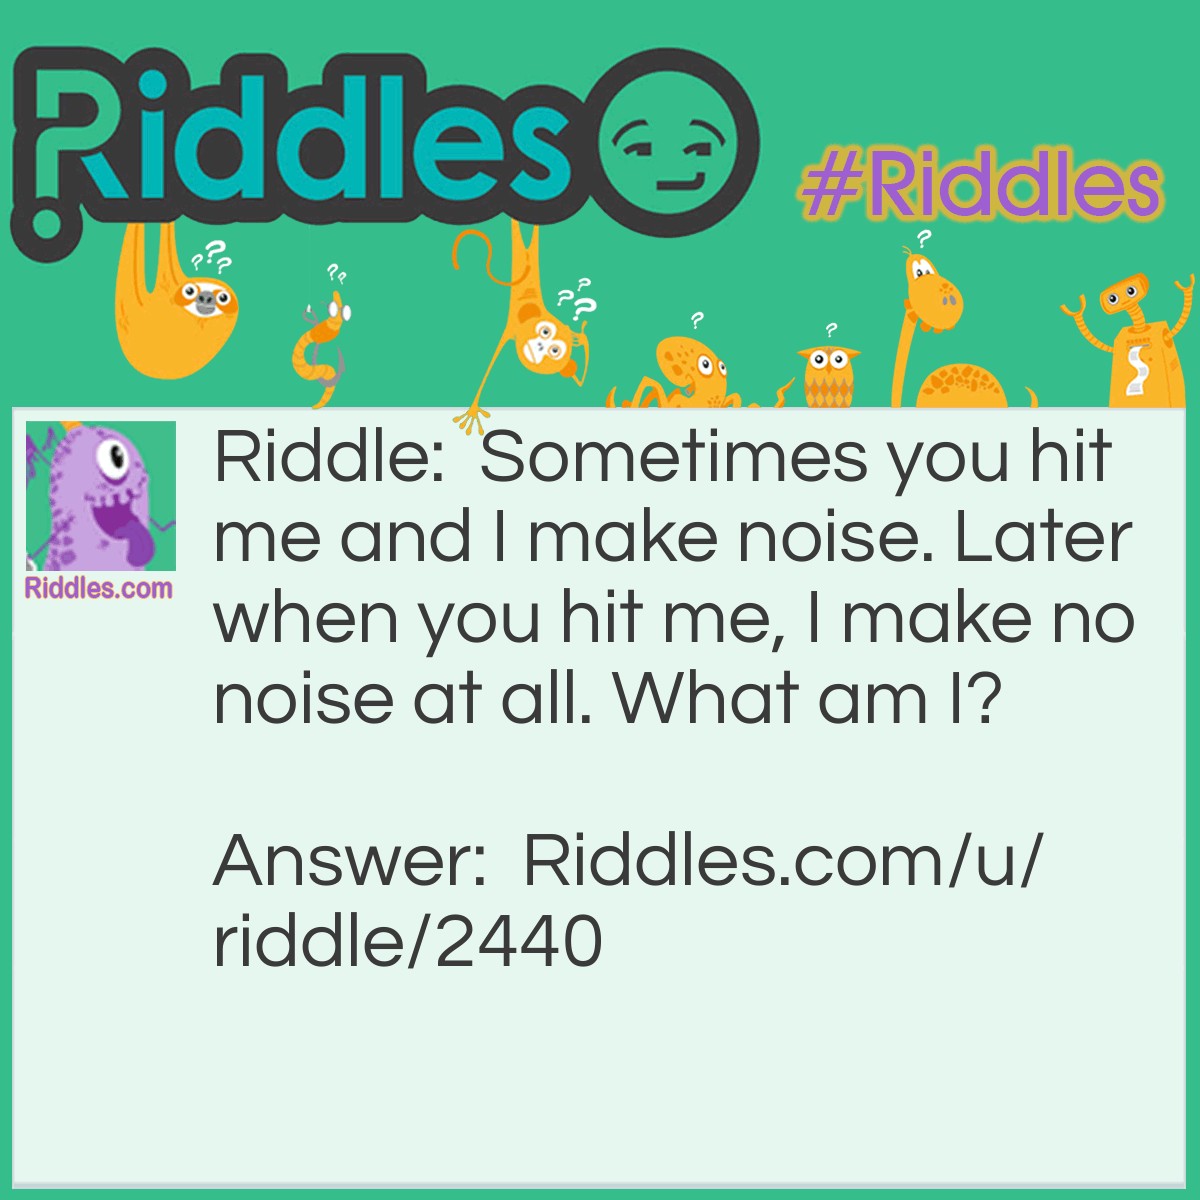 Riddle: Sometimes you hit me and I make noise. Later when you hit me, I make no noise at all. What am I? Answer: An electric piano.